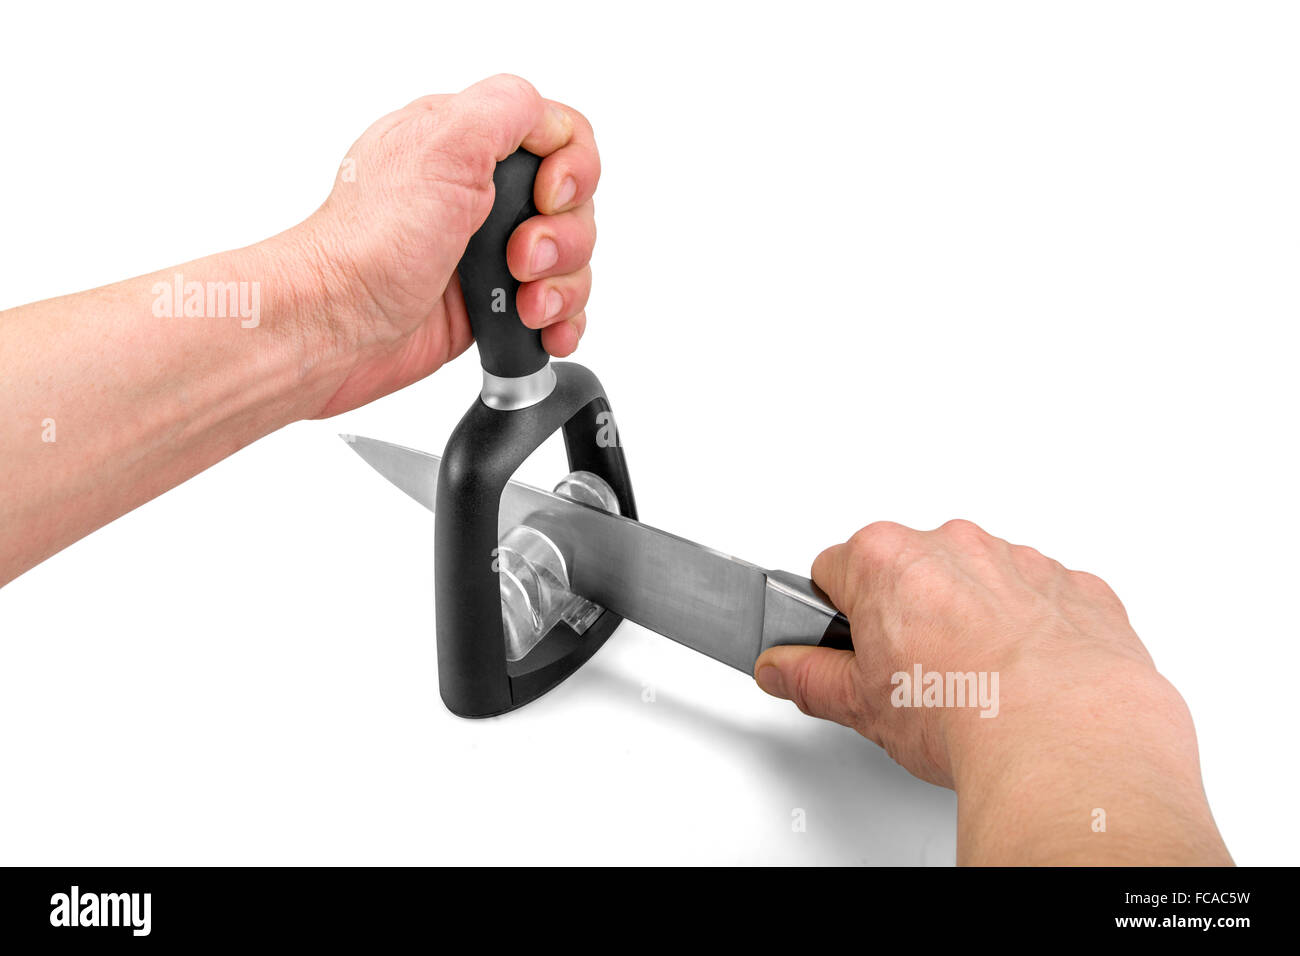 Knife hand sharpening technique - isolated on white with clipping path Stock Photo